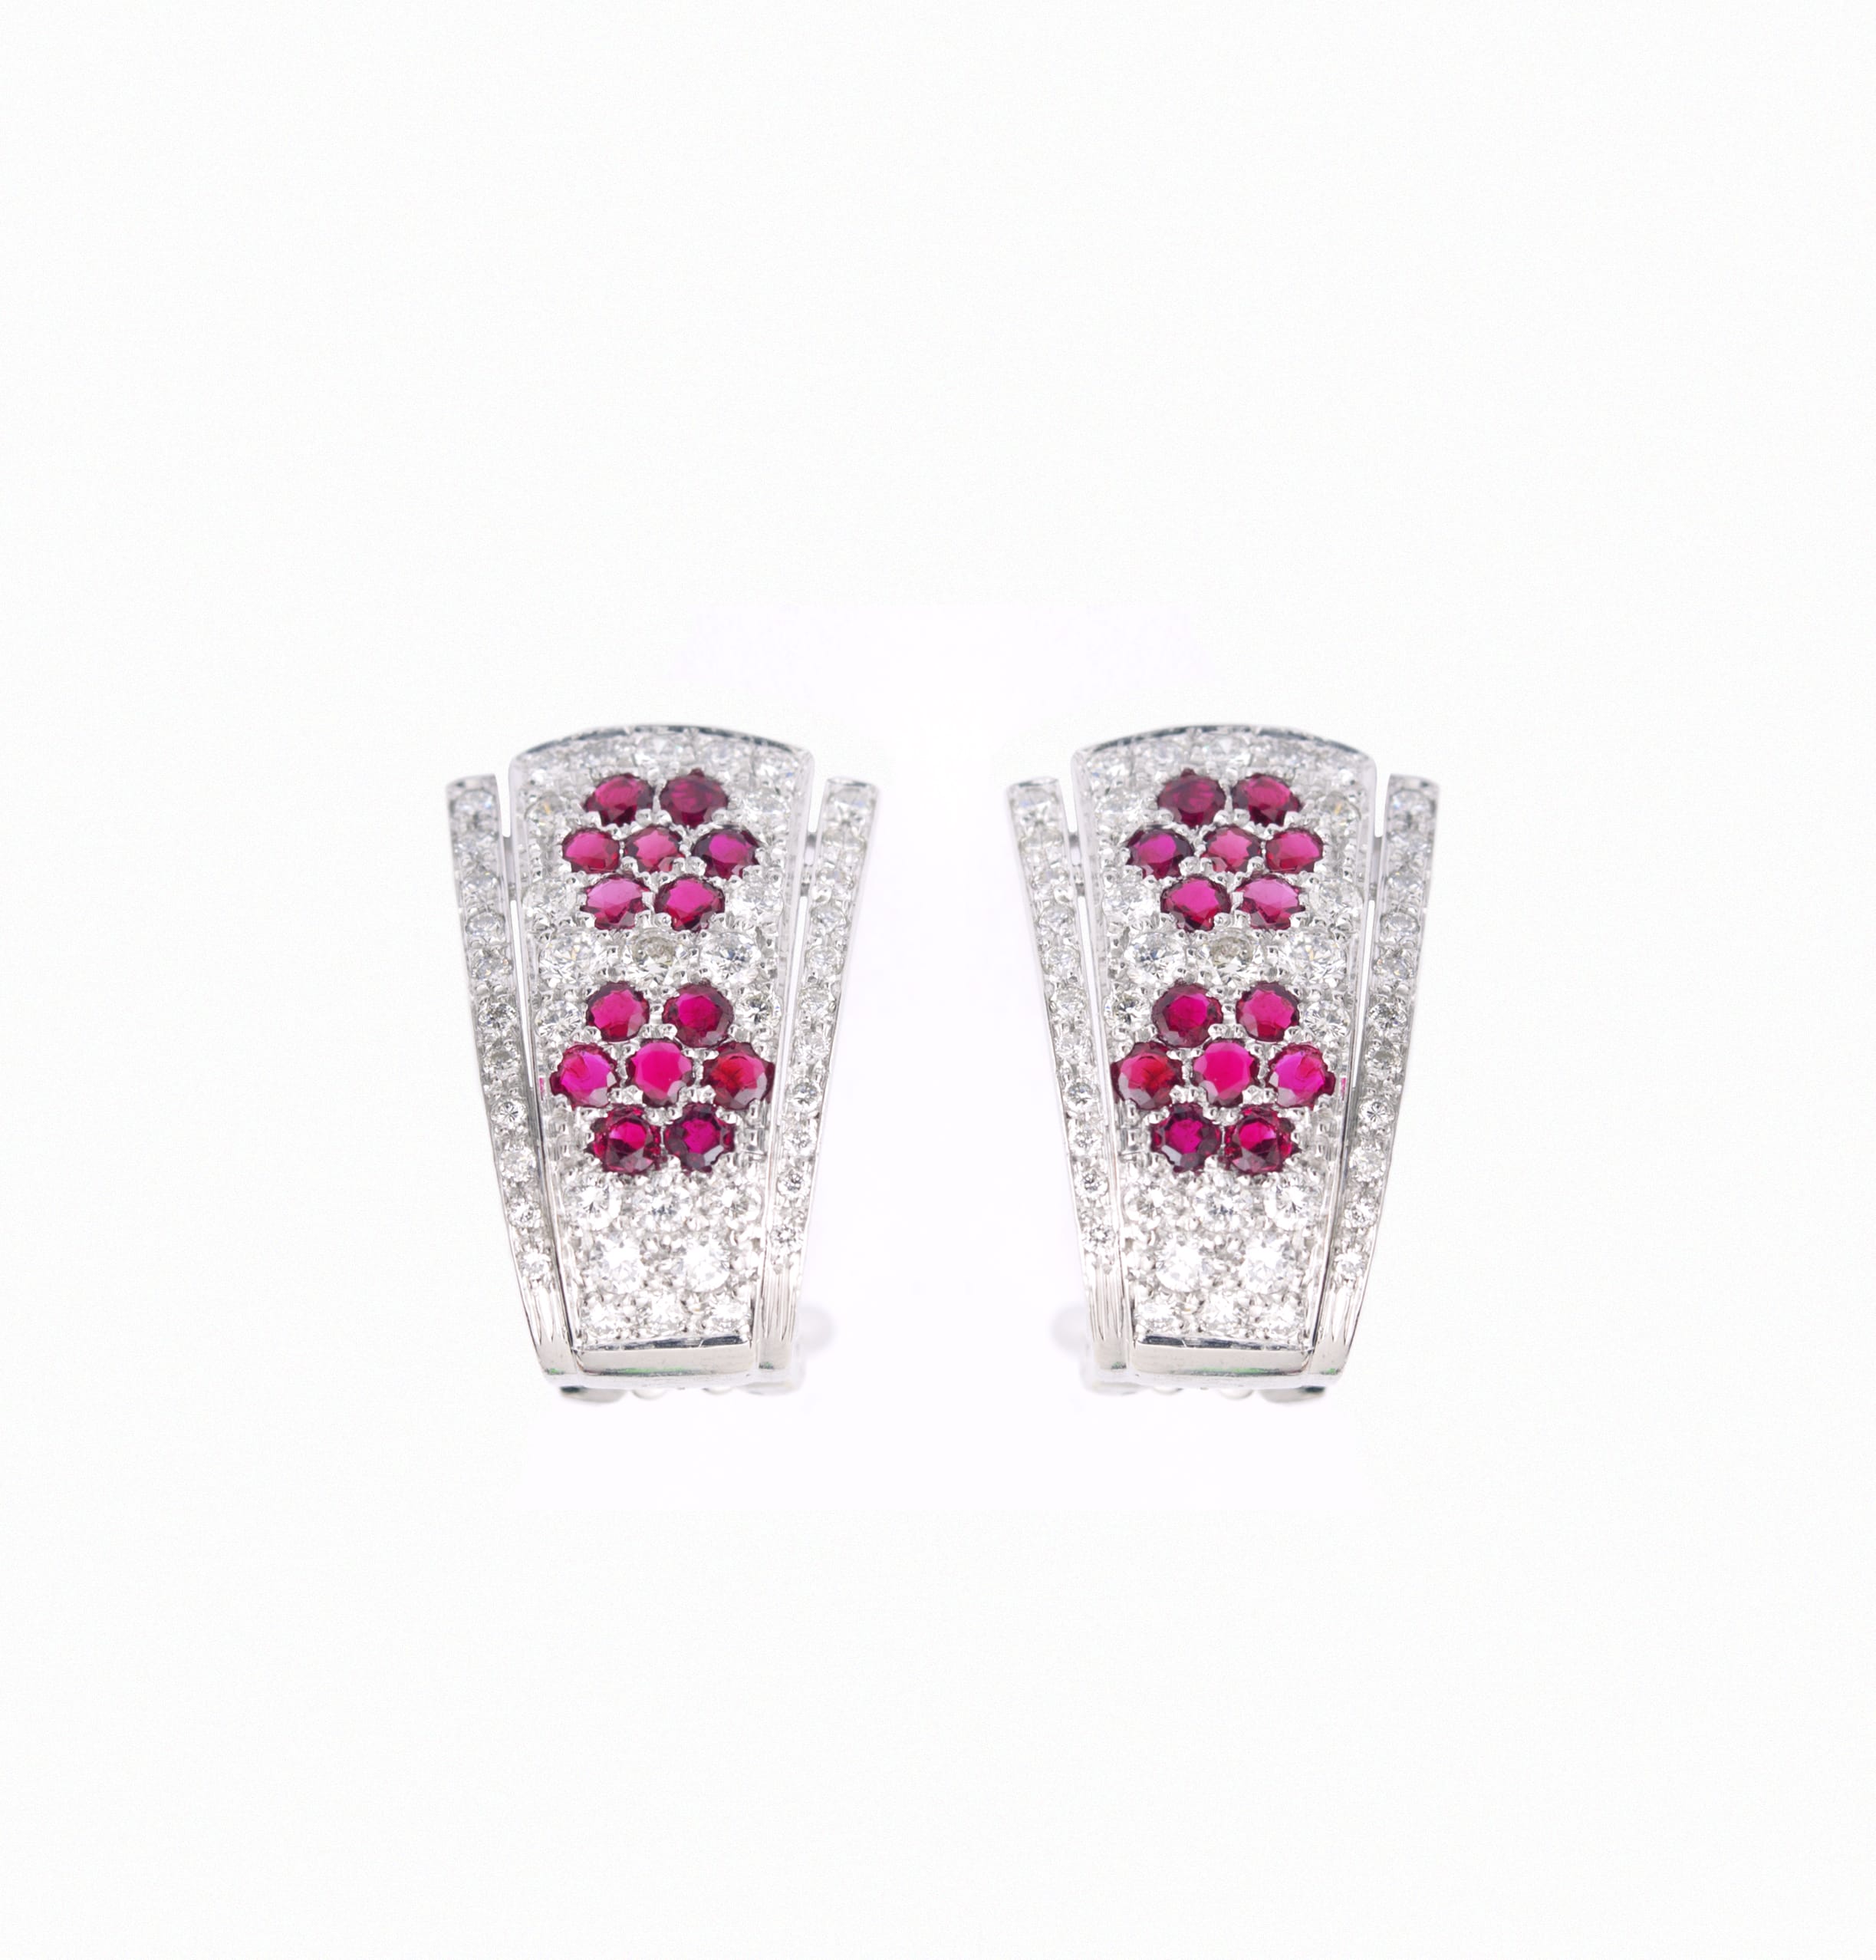 White gold earrings with rubies and diamonds